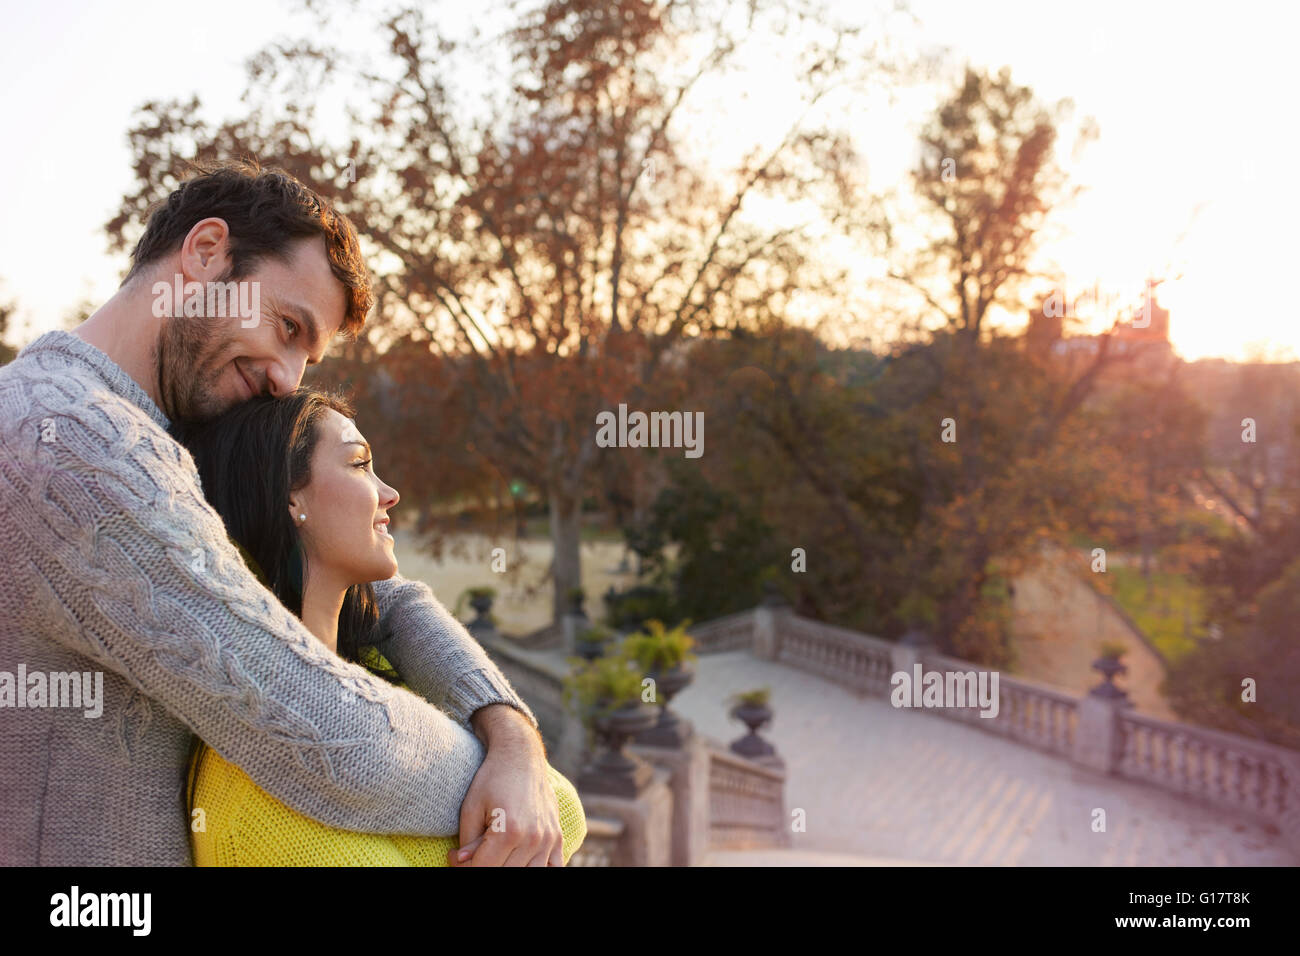 Couple in park hugging enjoying view Banque D'Images